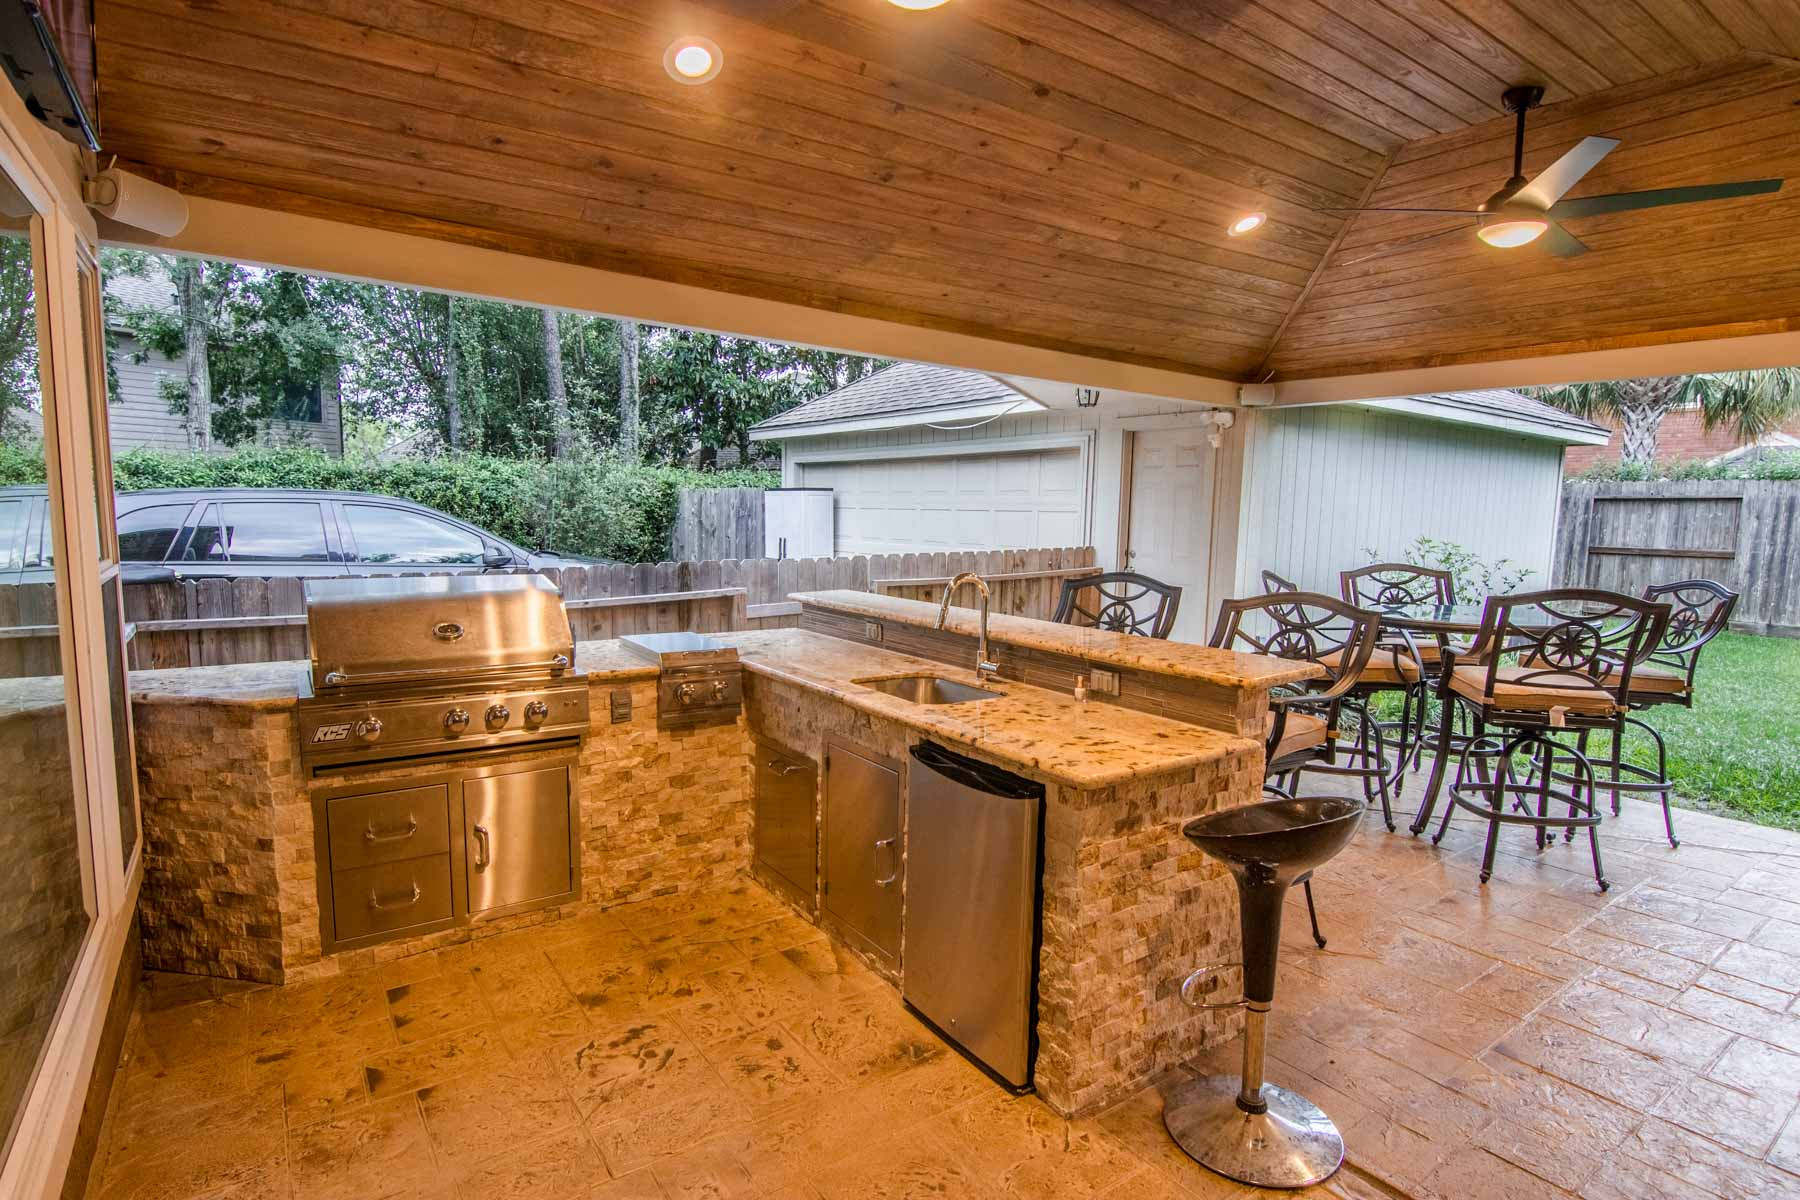 Outdoor Kitchen Covered Patio
 Outdoor Kitchens HHI Patio Covers Houston